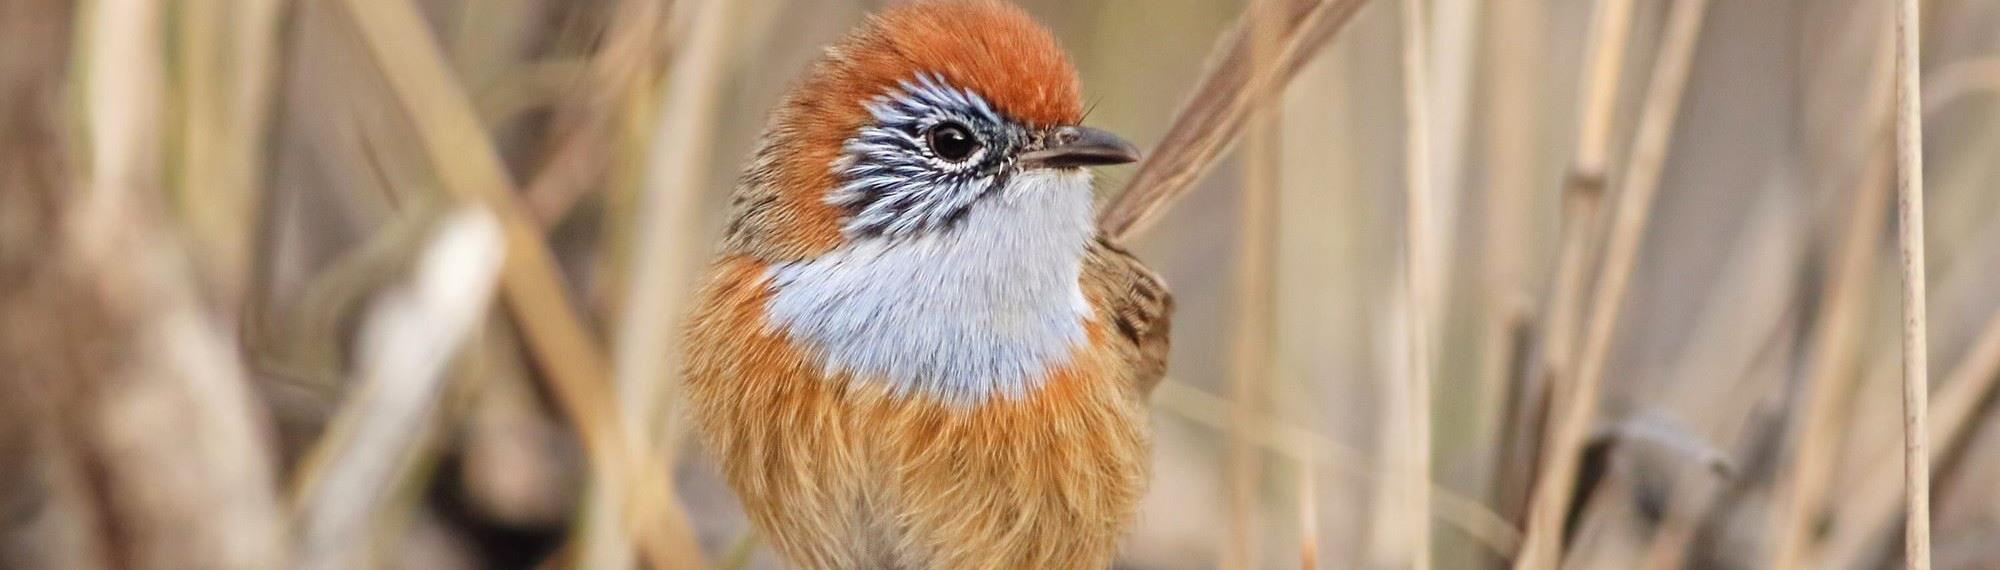 Mallee Emu-wren in long dry grass looking at the camera. It has a bright orange head, white chest and a pale orange body.